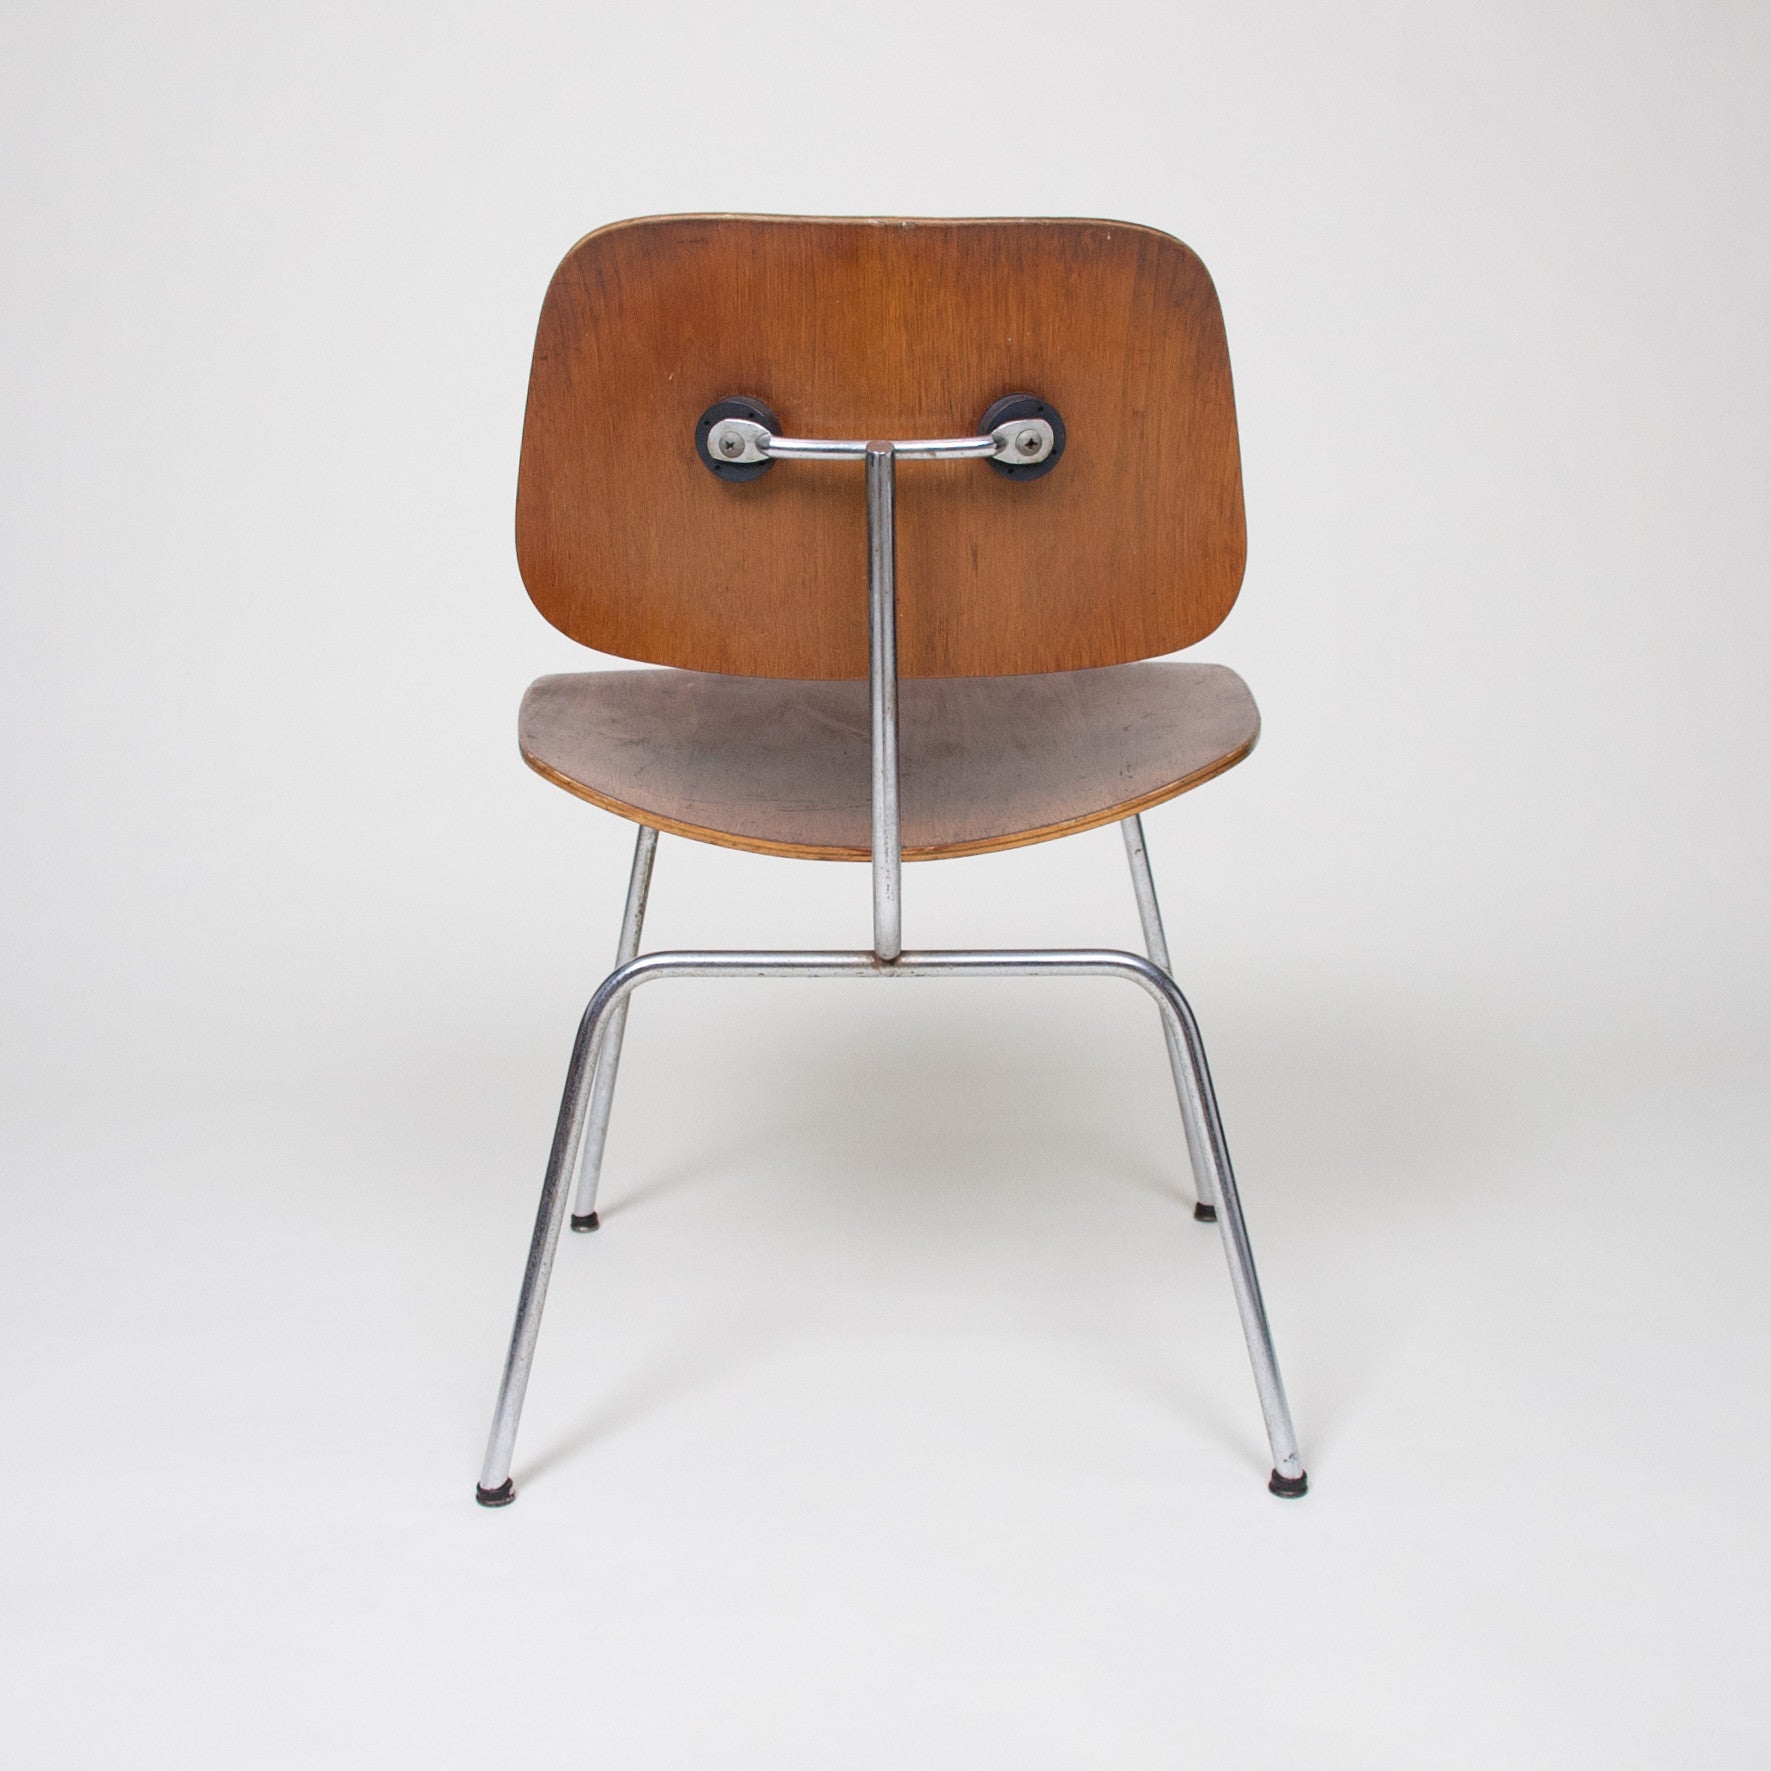 SOLD Early Herman Miller Eames DCM 1952 Early Feet